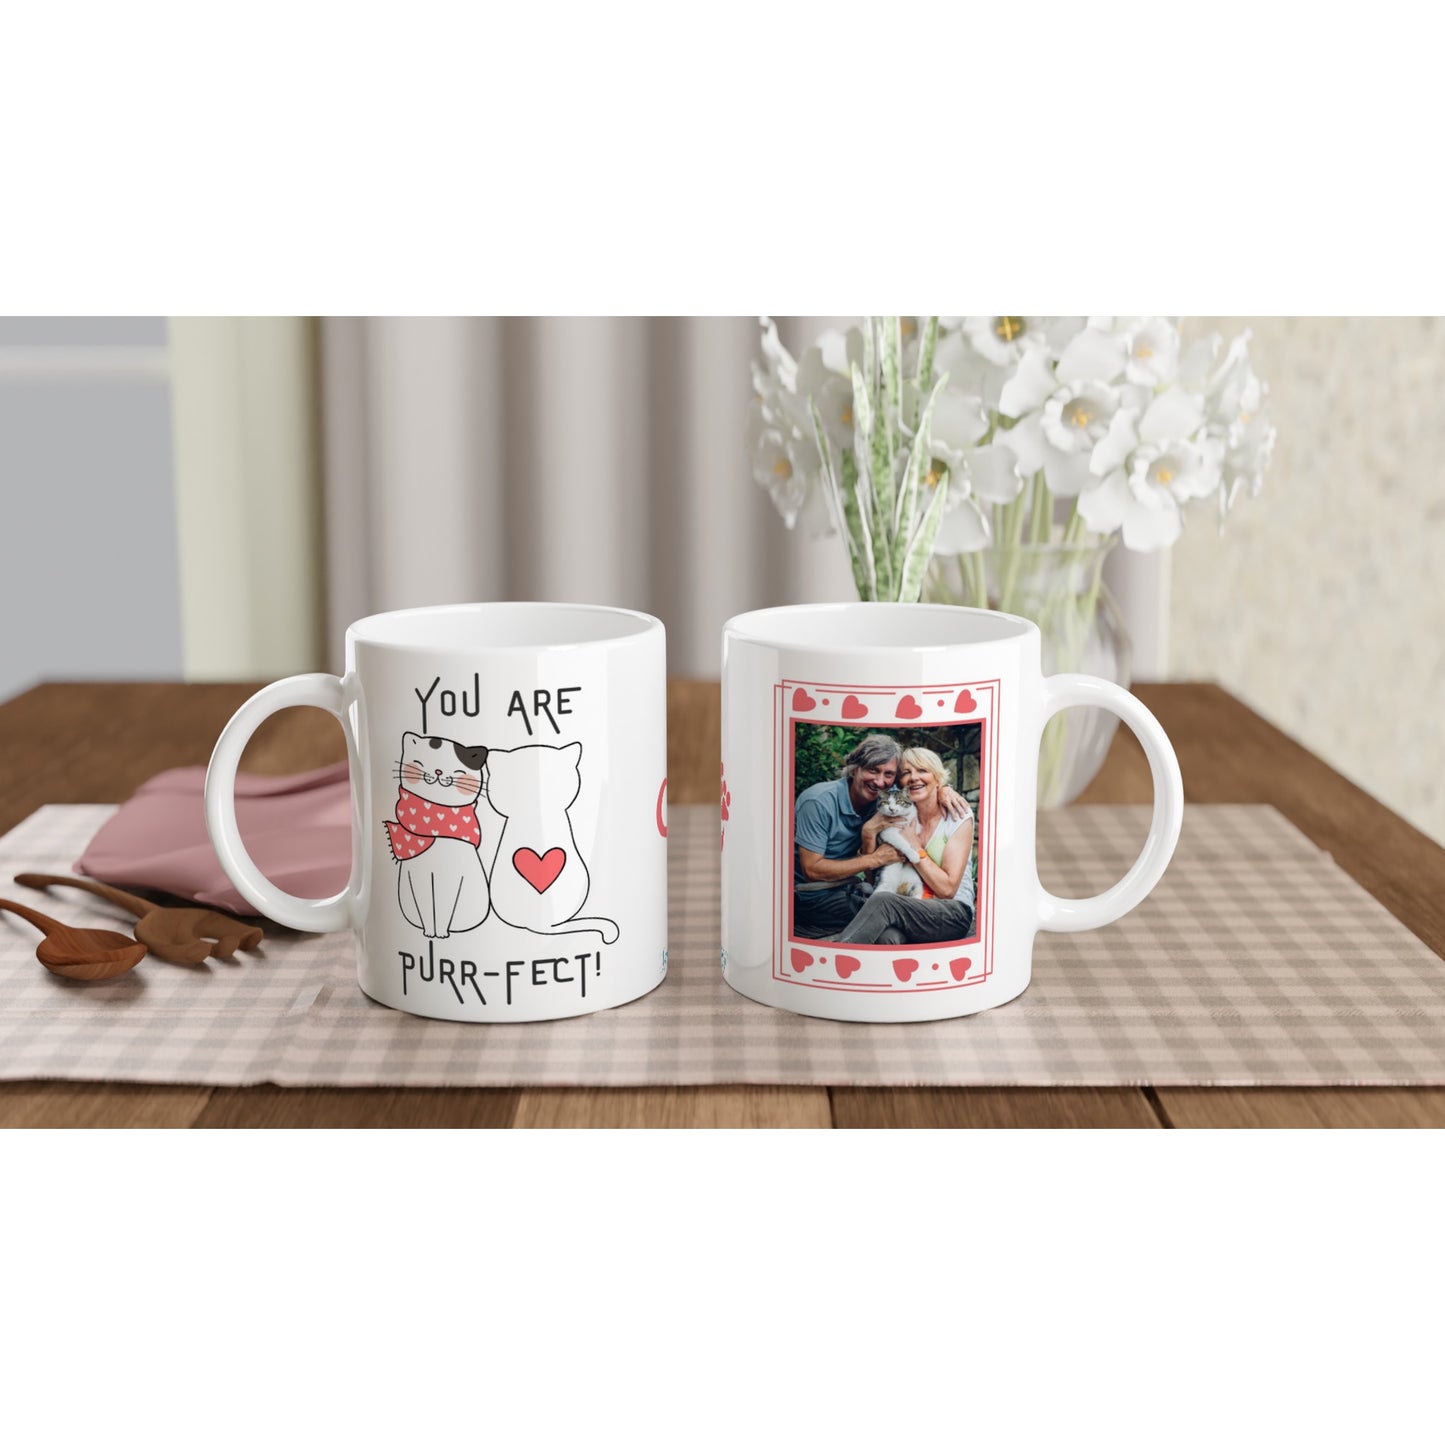 "You Are Purr-fect!" Customizable Photo 11 oz. Mug front and back view on table